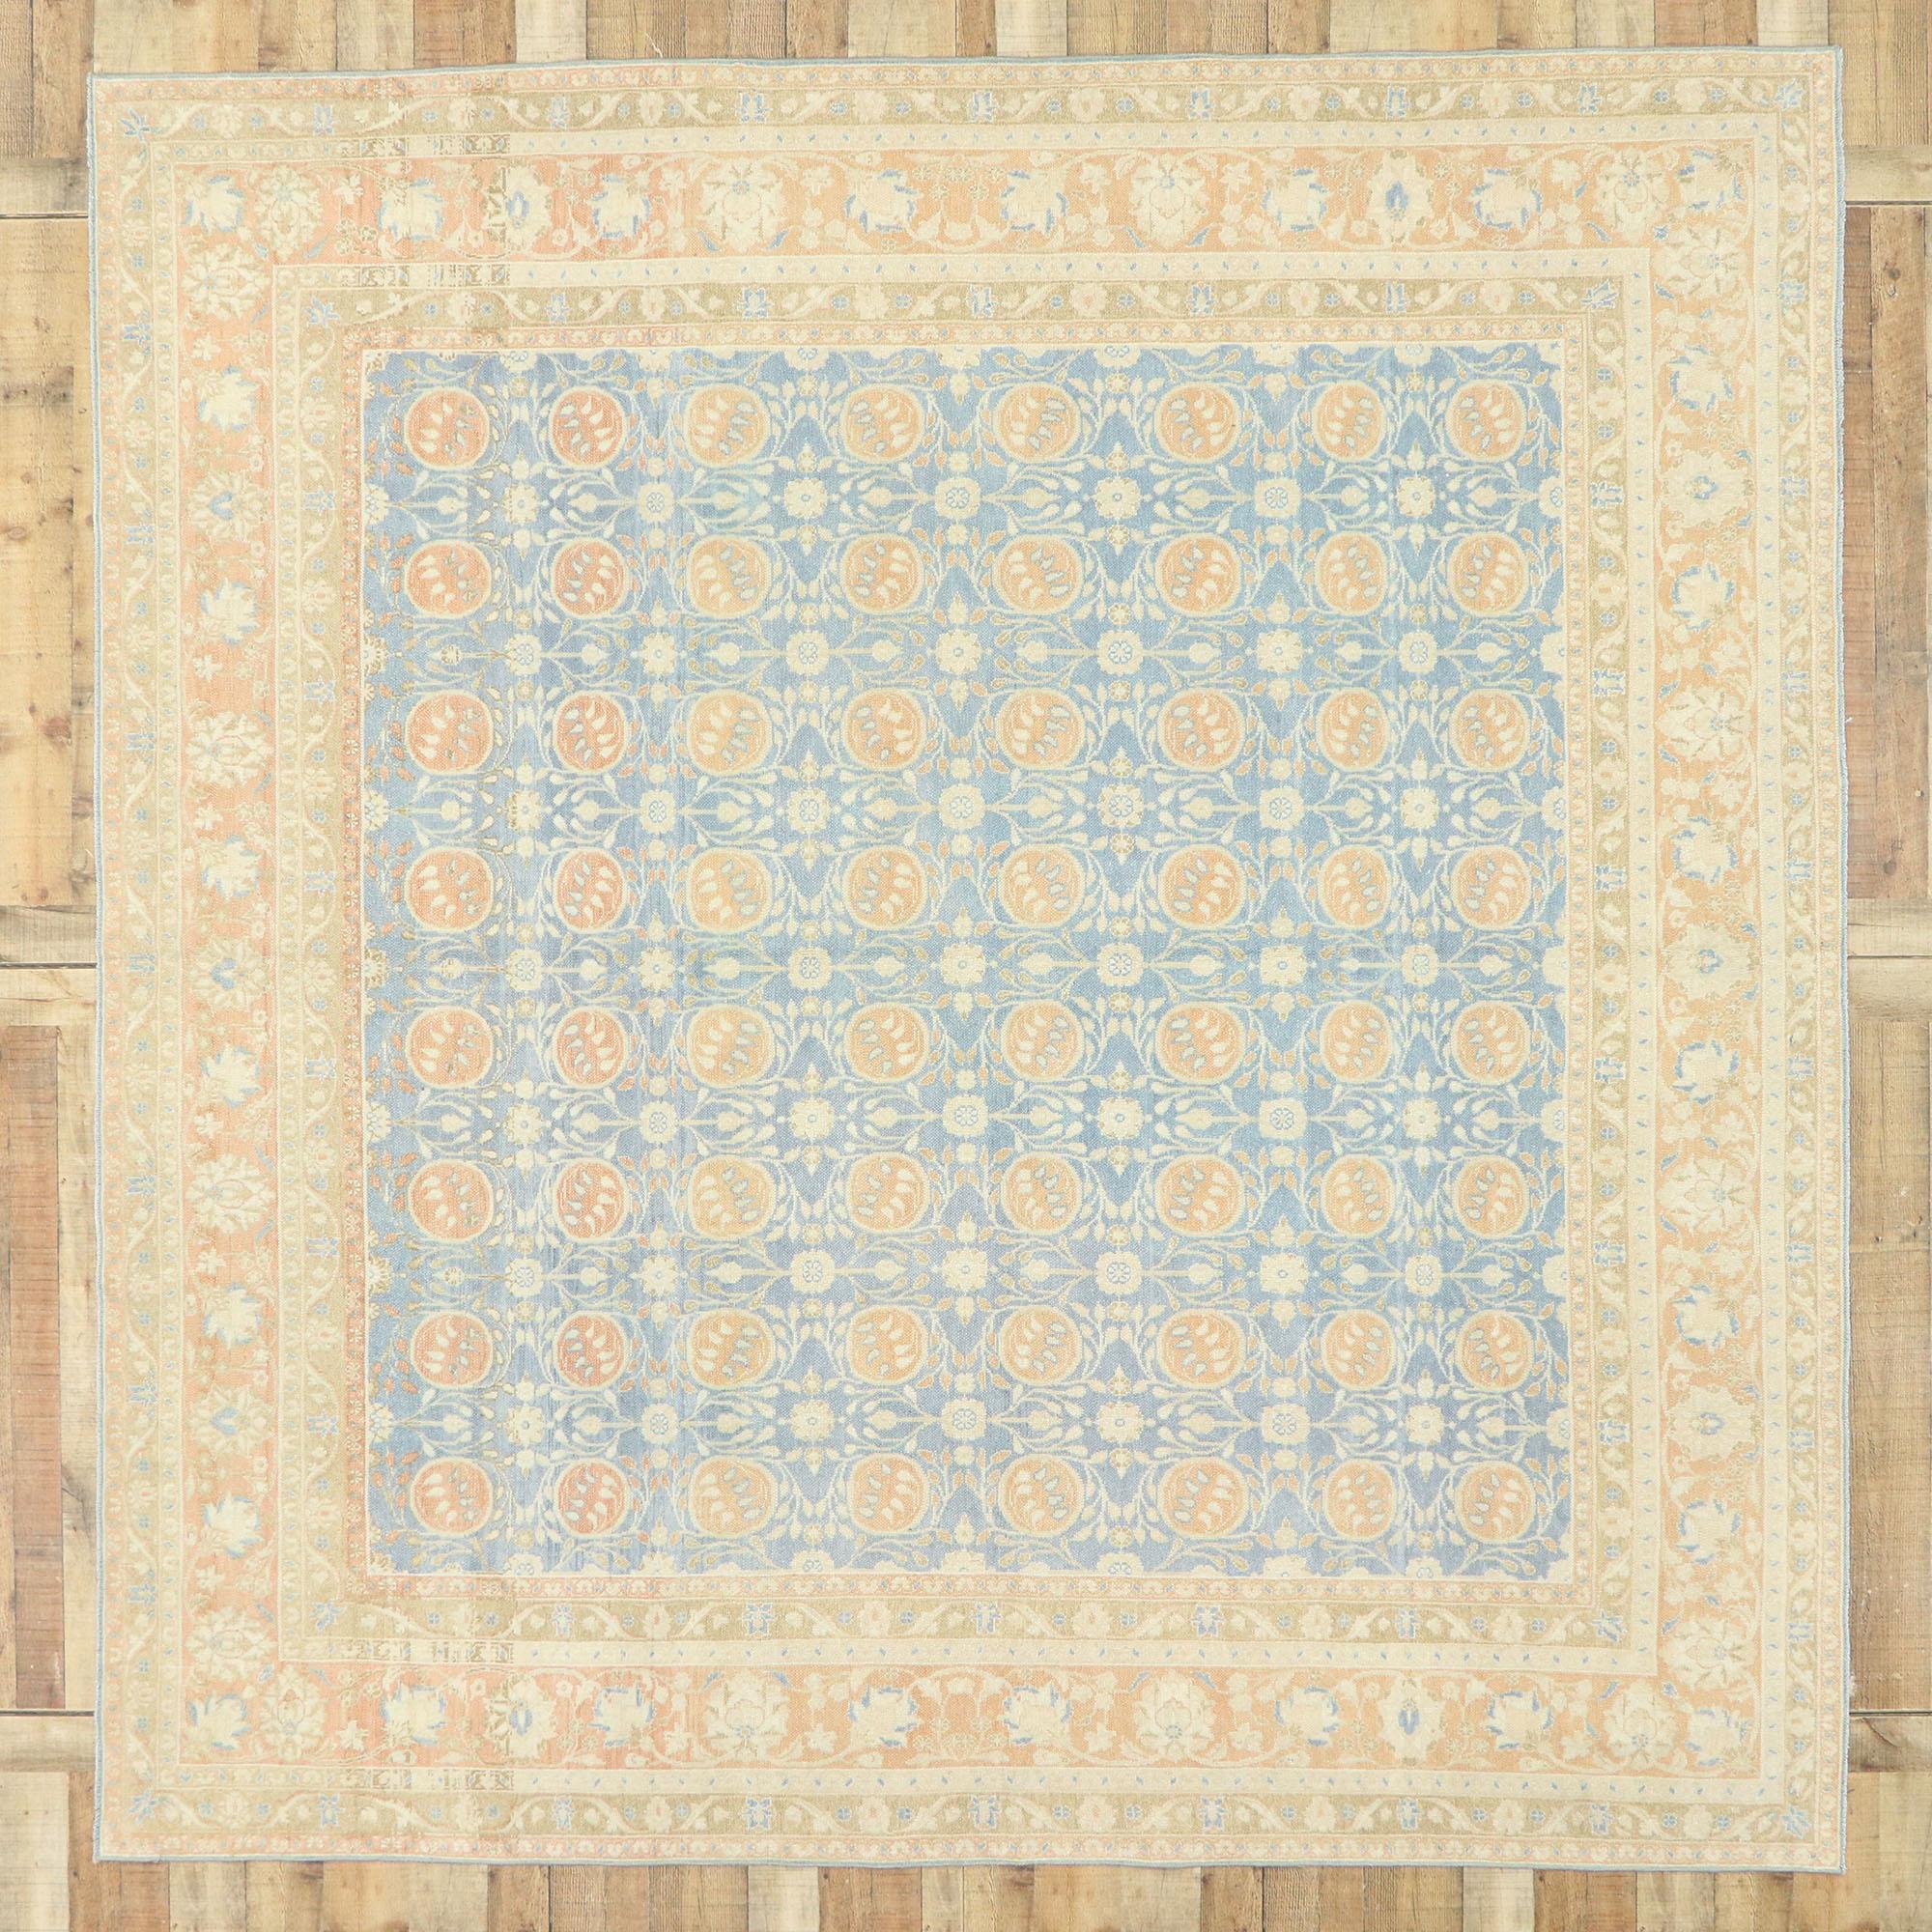 Wool Vintage Portuguese Khotan Style Rug with Italian Mediterranean Style For Sale